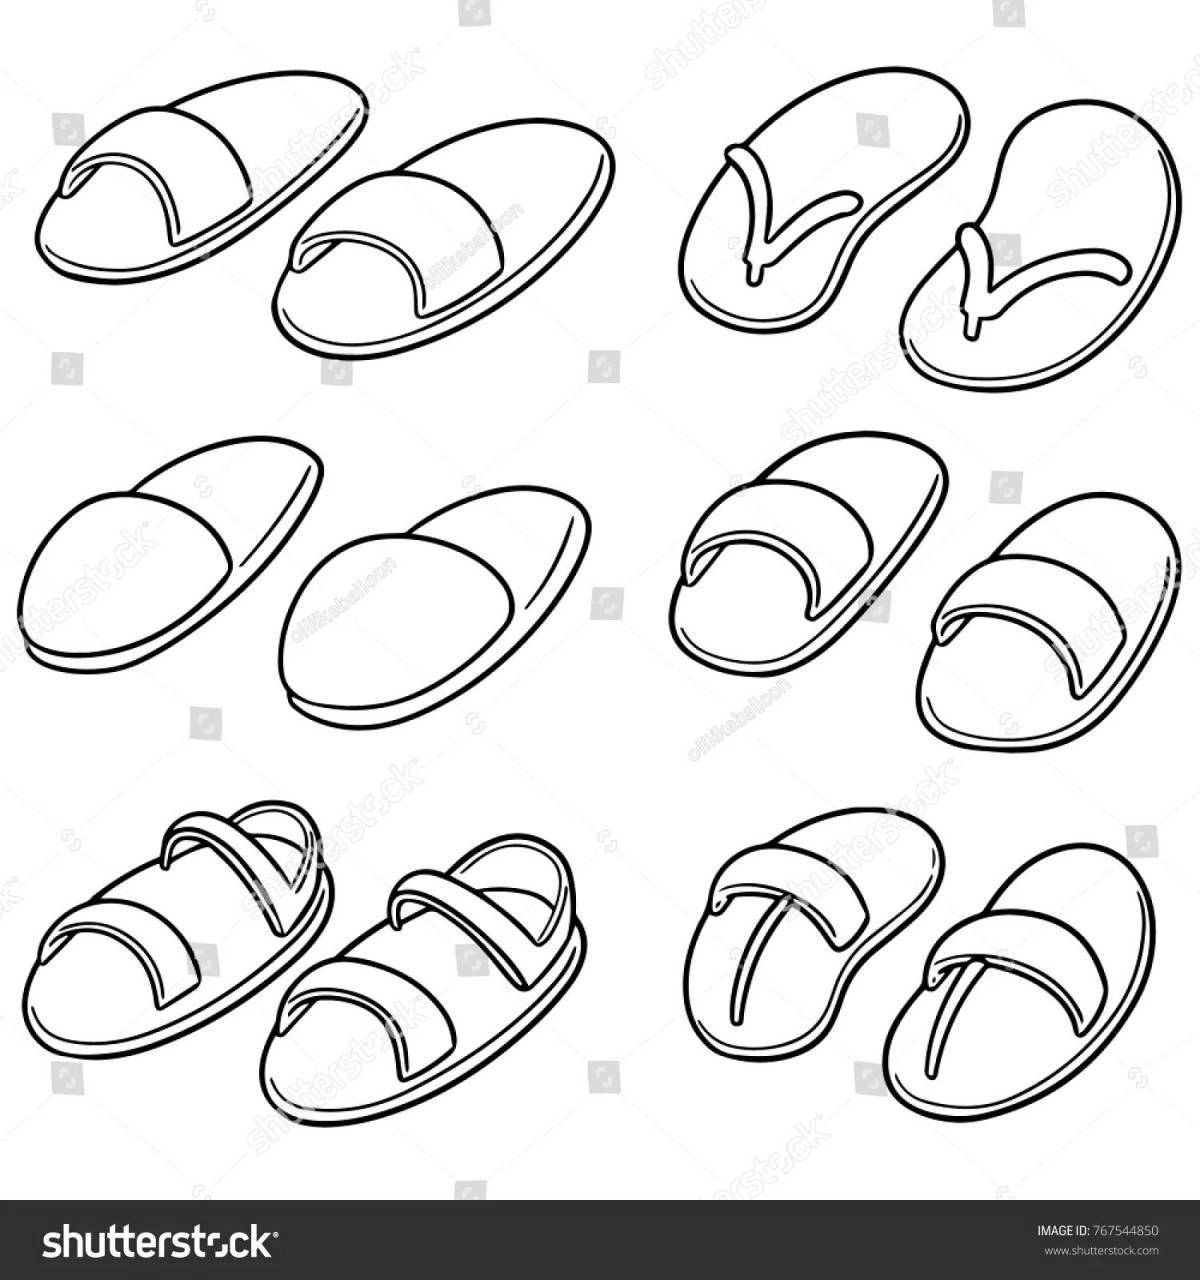 Coloring page funny slippers for preschoolers